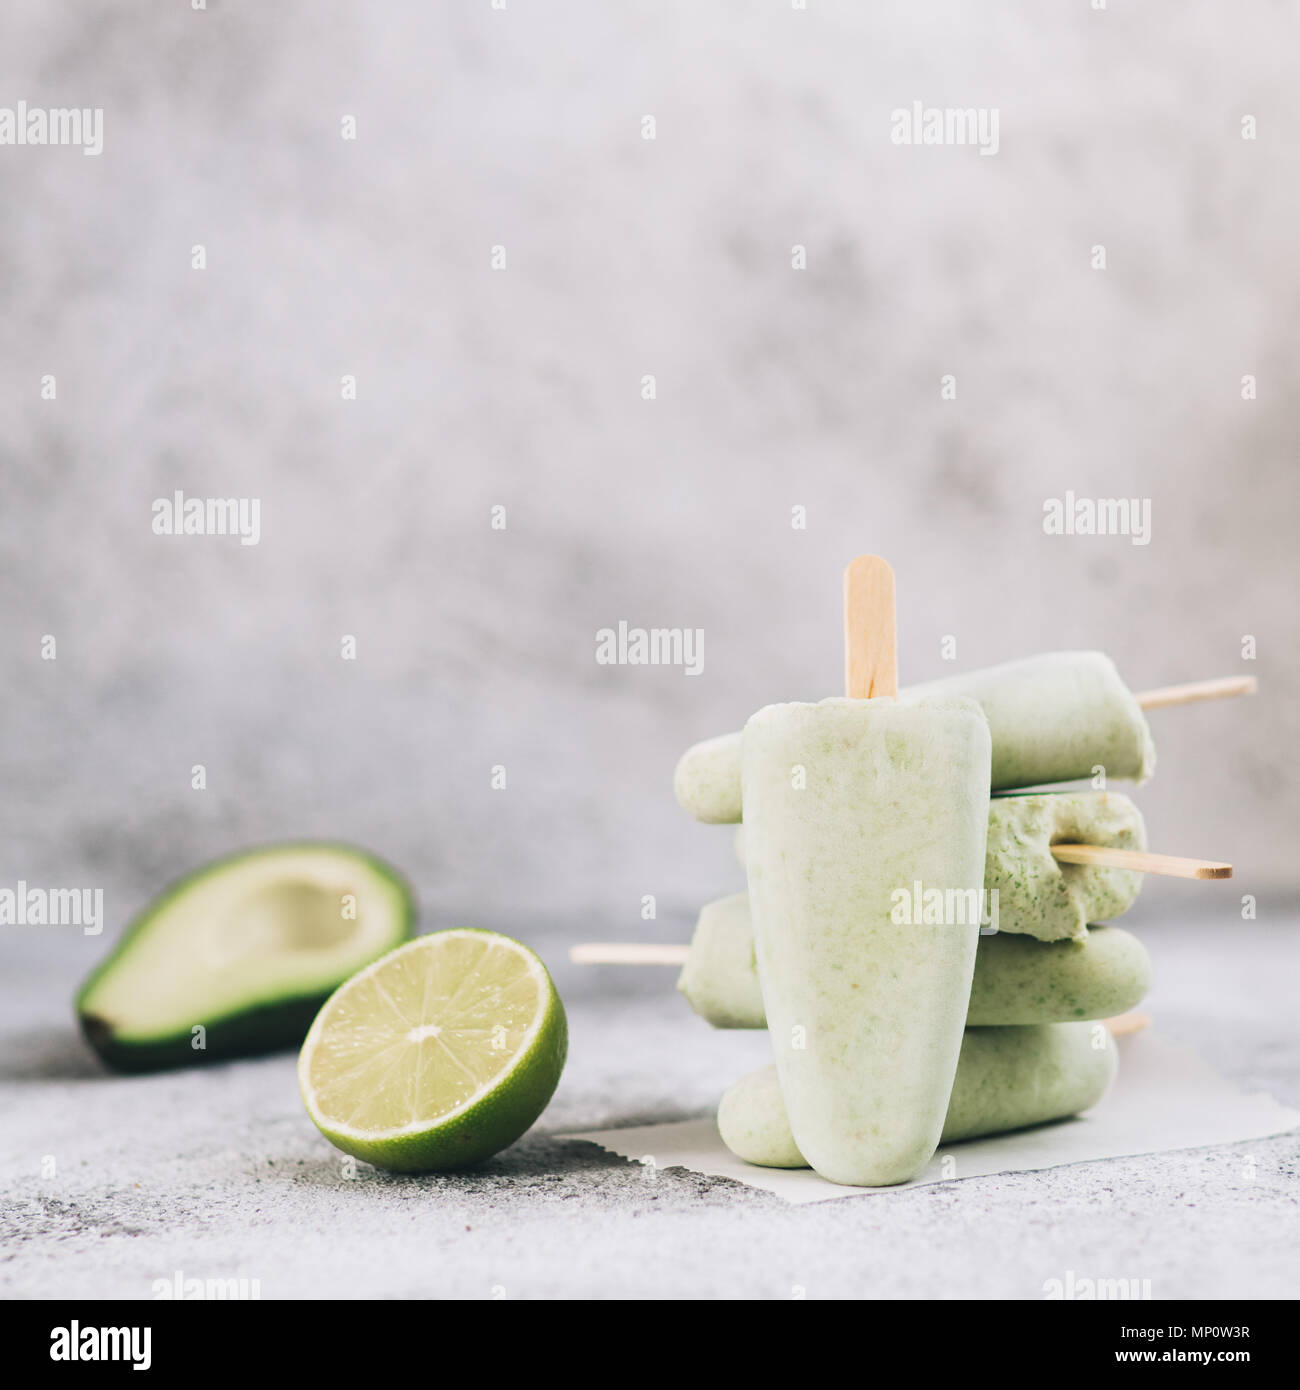 Homemade raw vegan avocado lime popsicle. Sugar-free, non-dairy green ice cream on gray cement textured background. Copy space. Ideas and recipes for healthy snack, dessert or smoothie Stock Photo